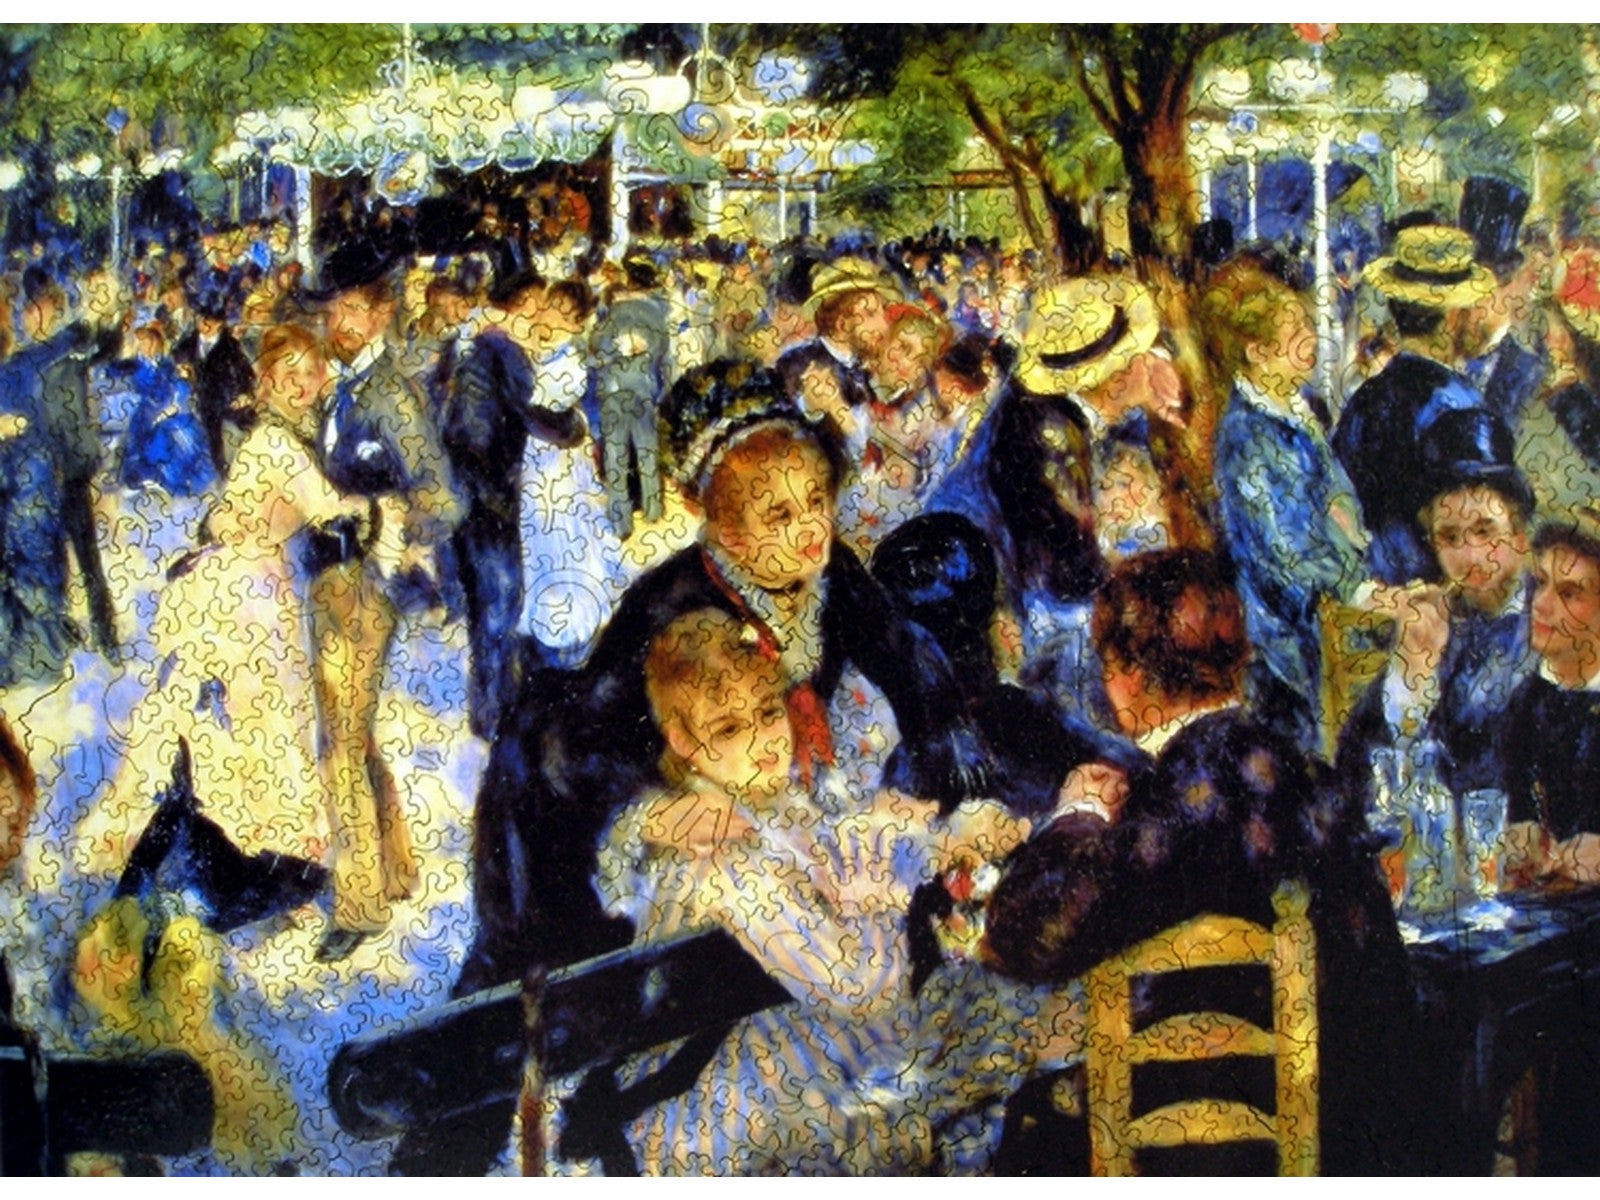 The front of the puzzle, Le Moulin de la Galette, which shows an outdoor party with people dancing.